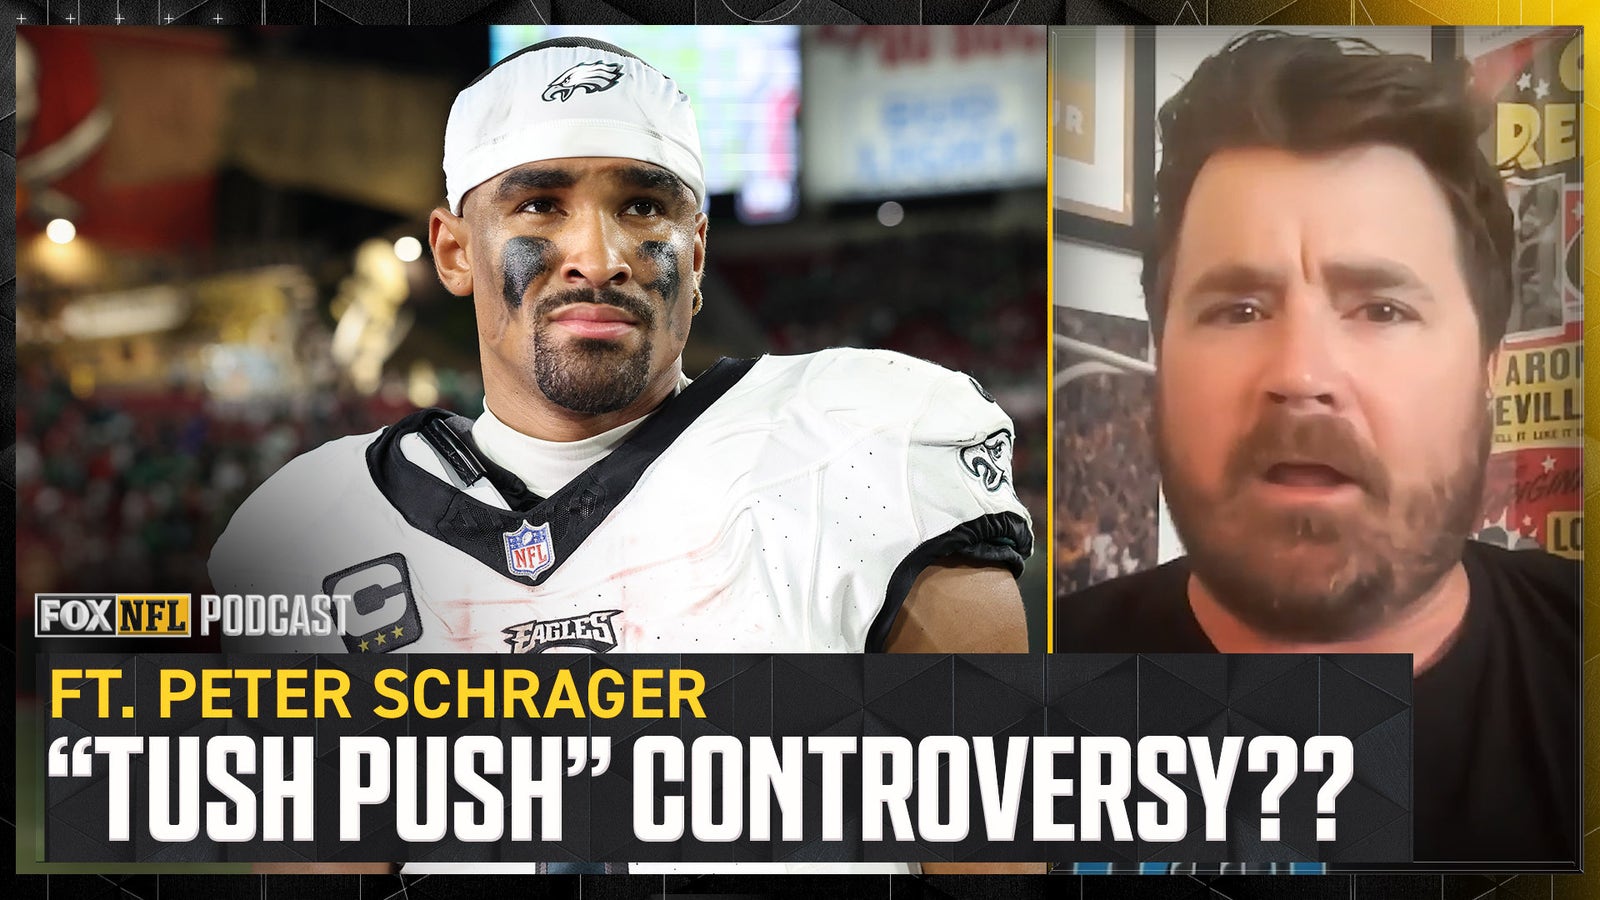 Peter Schrager, Dave Helman don't like the name ‘Tush Push'